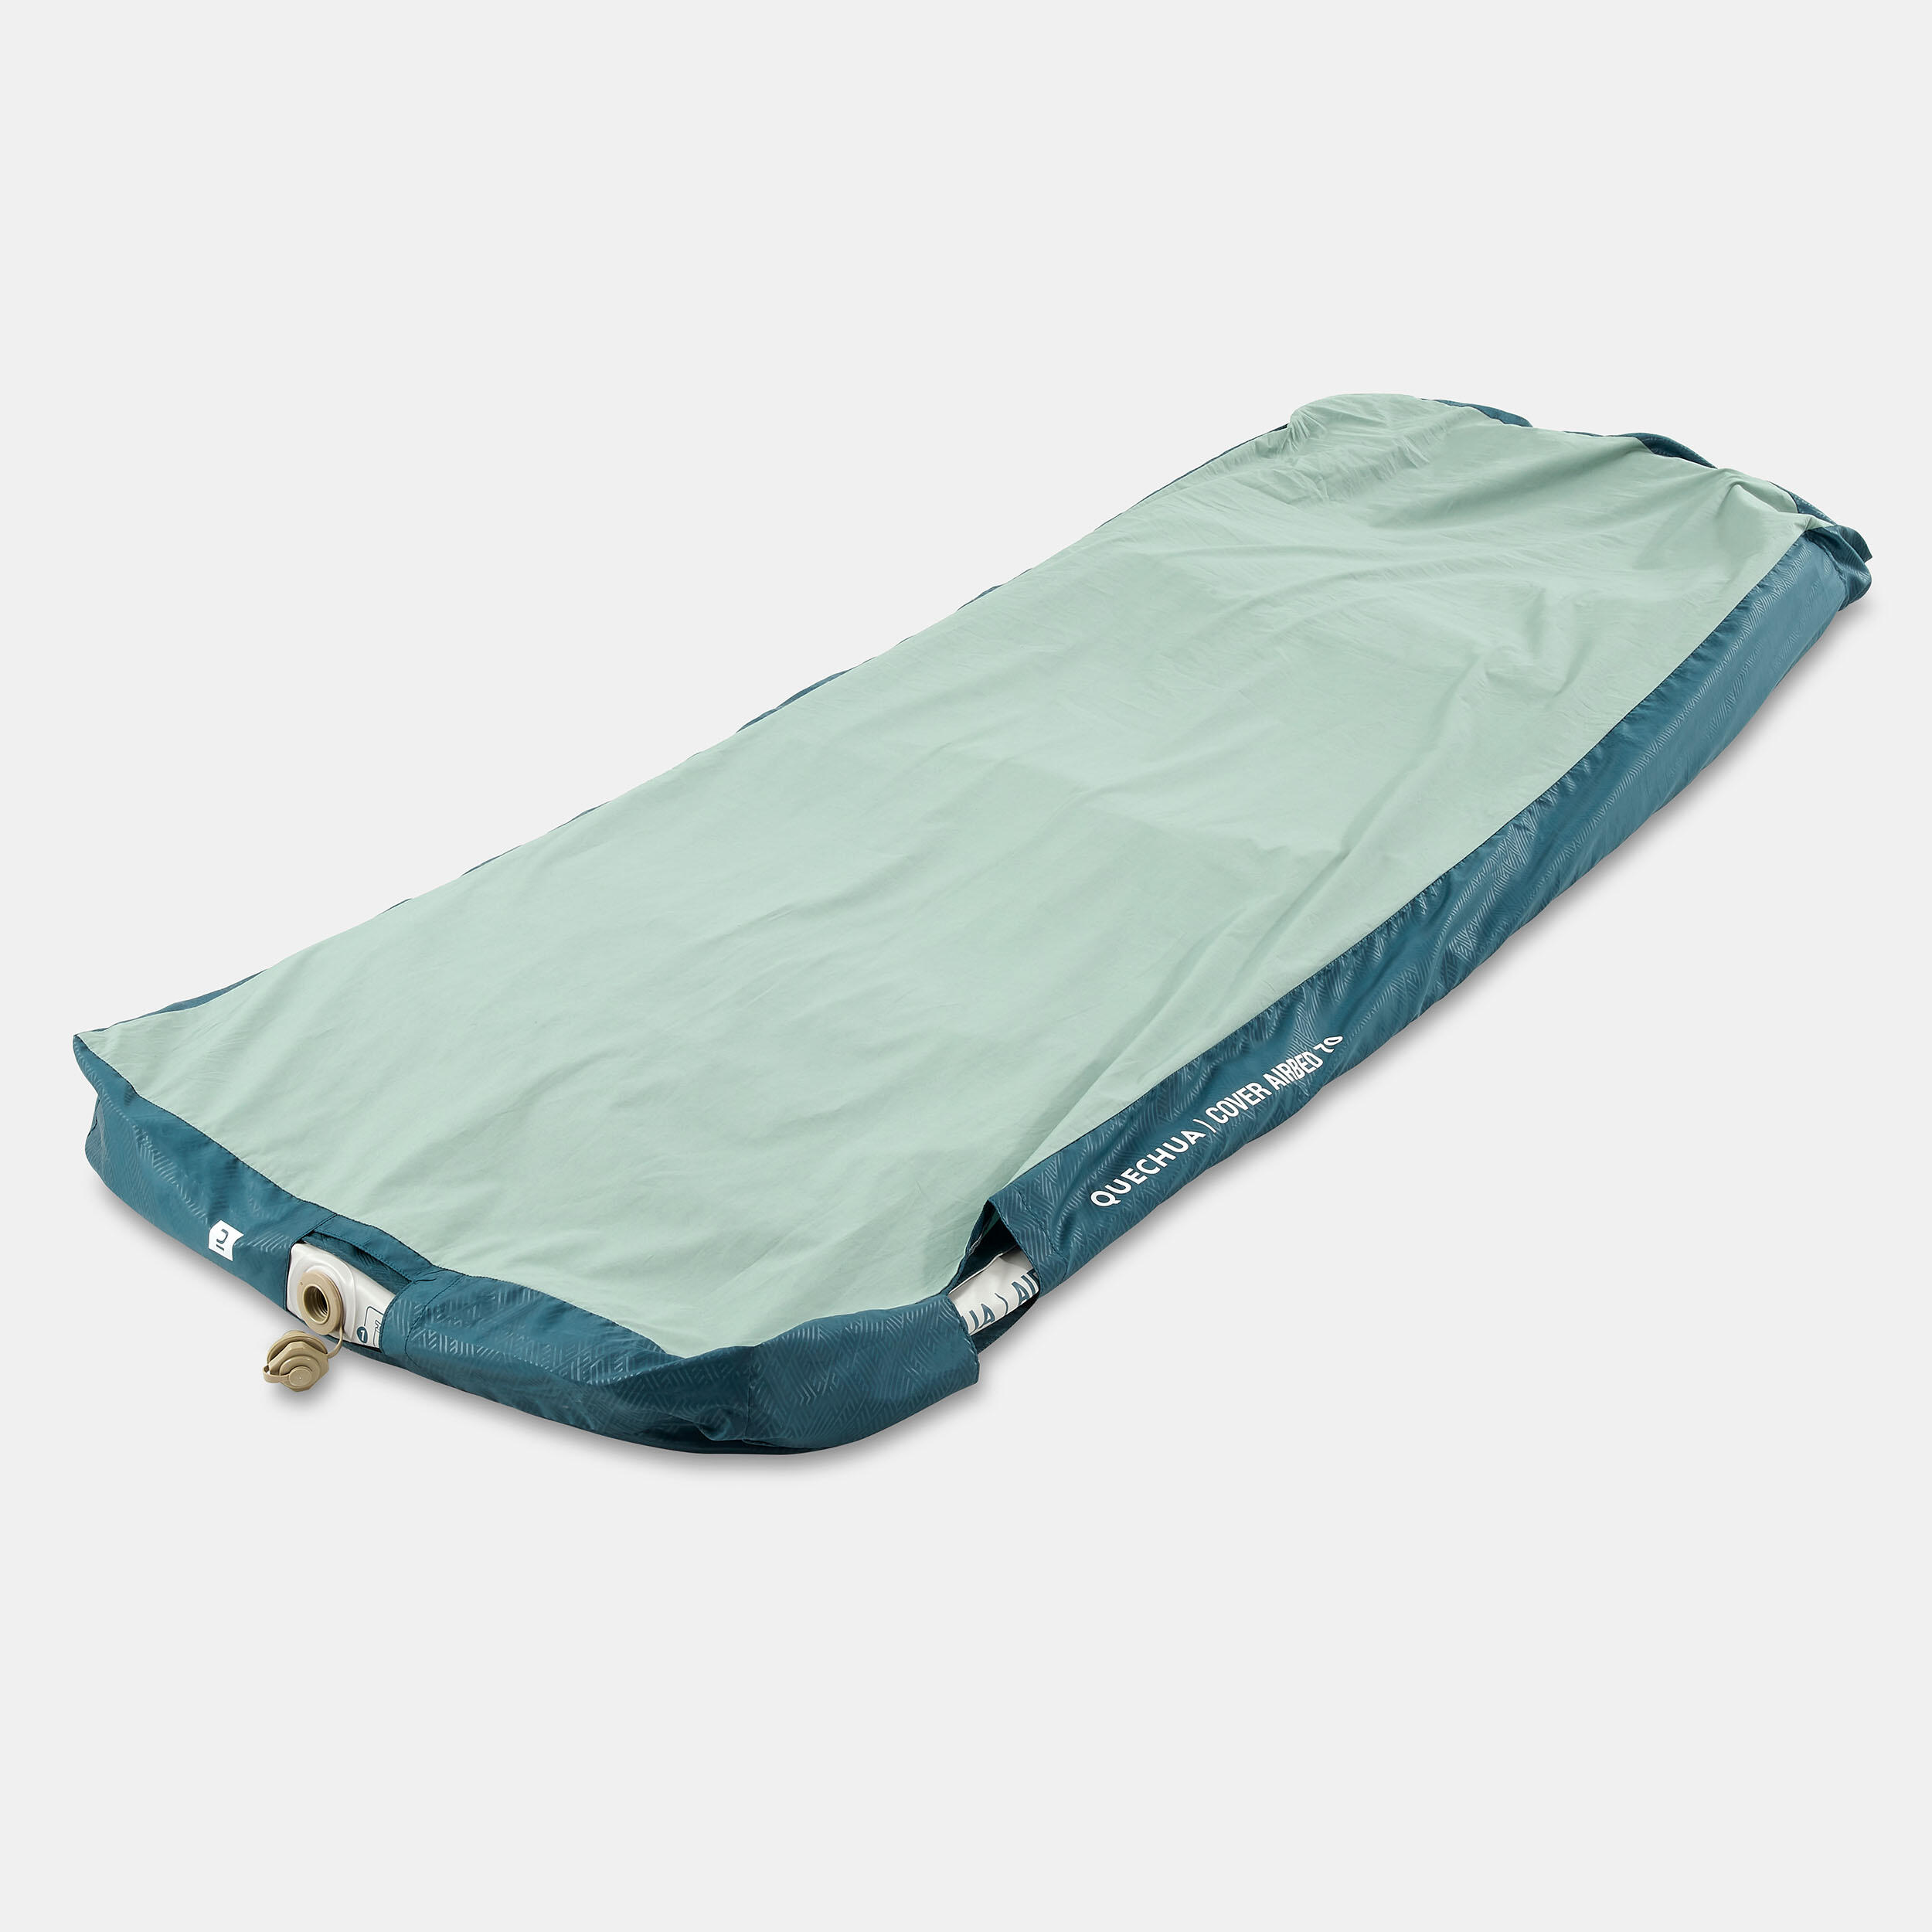 Inflatable Mattress Cover -  Airbed Cover 70 cm - 1 Person 5/5